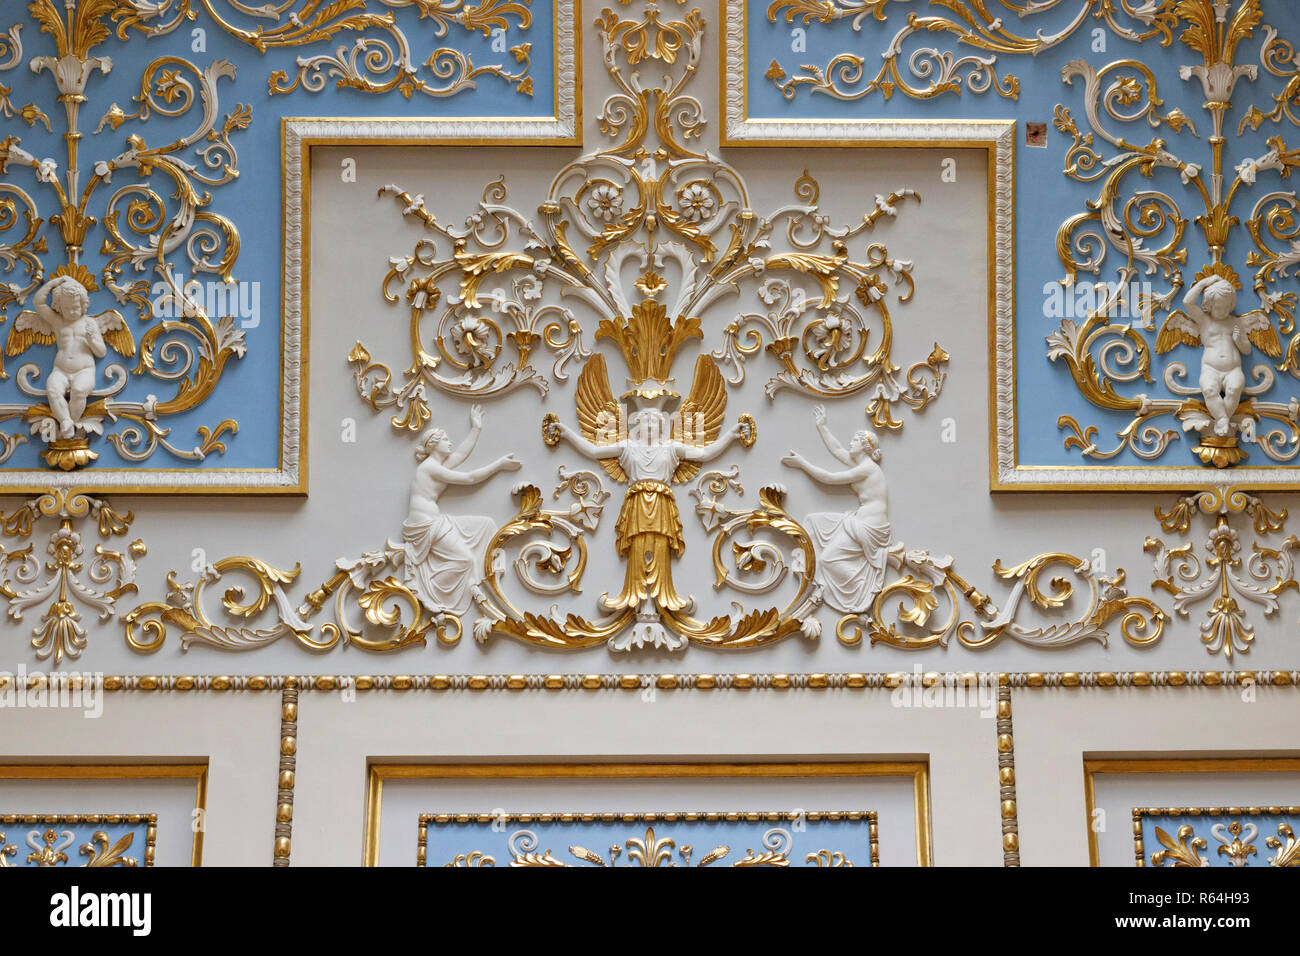 Wall with gilded carvings on white and blue panels showing floral design with cupids and angels. Hermitage State Museum, St Petersburg, Russia. Stock Photo